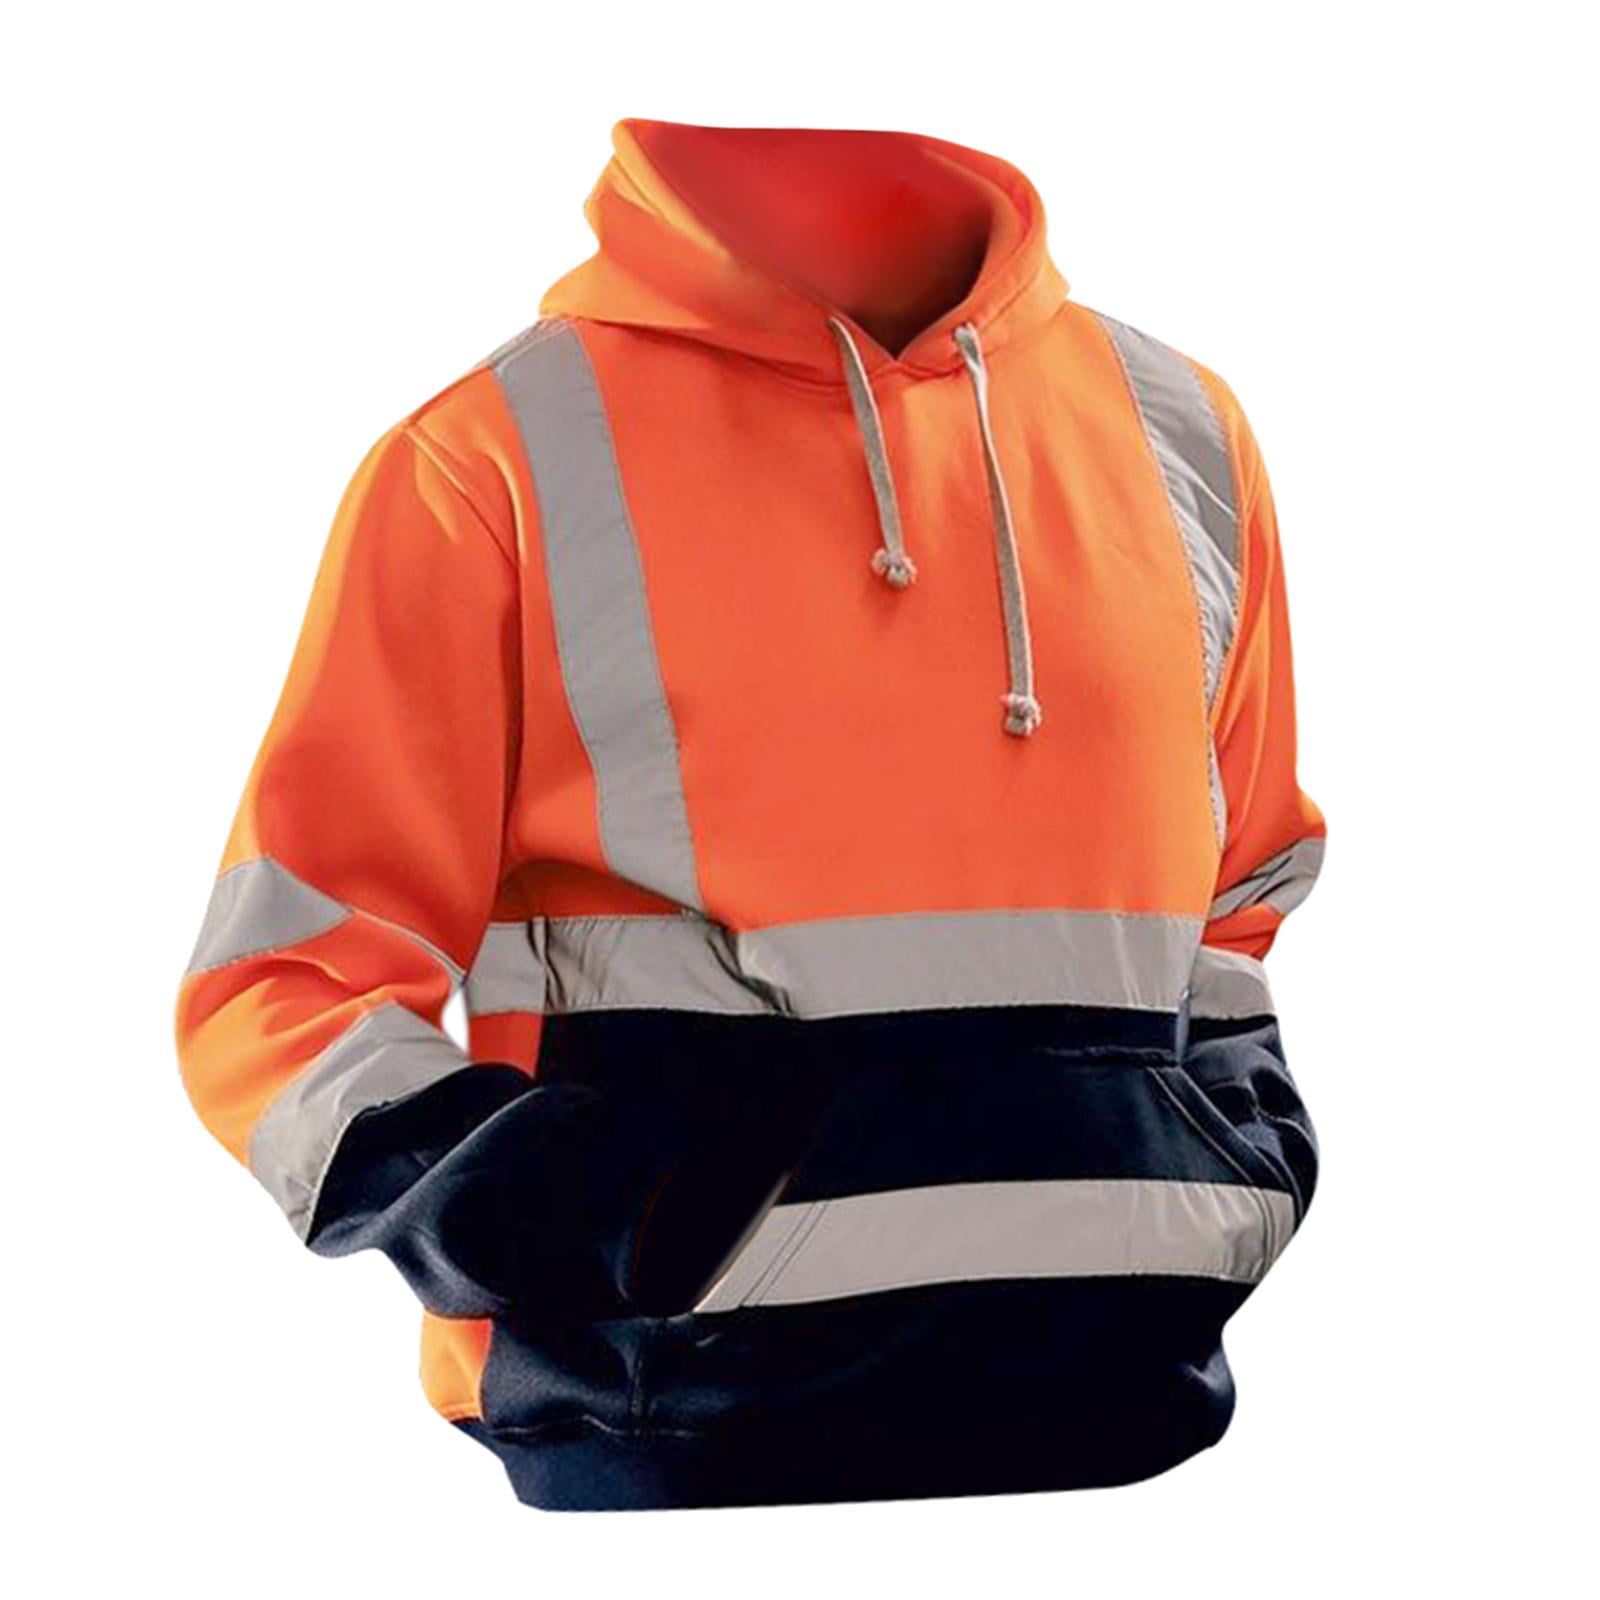 MENS High Visibility Hoodie Sweatshirt Two Tone Jumper Pullover Fleece Top S-5XL 